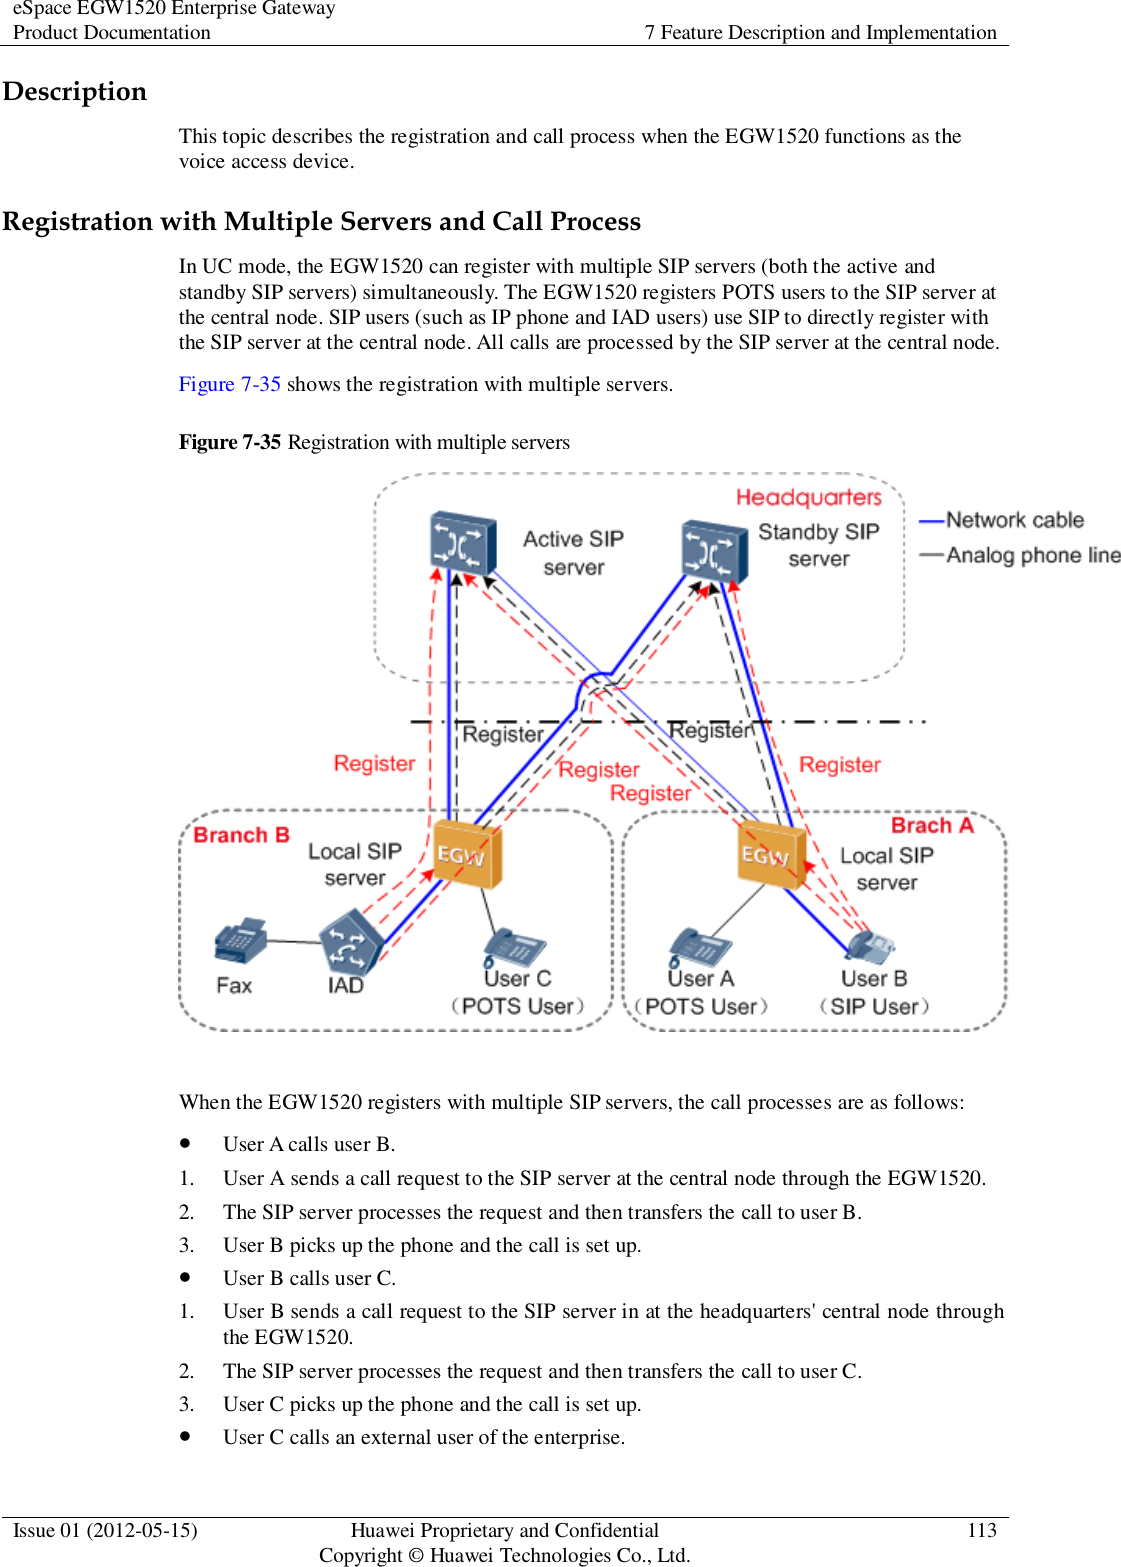 eSpace EGW1520 Enterprise Gateway Product Documentation 7 Feature Description and Implementation  Issue 01 (2012-05-15) Huawei Proprietary and Confidential                                     Copyright © Huawei Technologies Co., Ltd. 113  Description This topic describes the registration and call process when the EGW1520 functions as the voice access device. Registration with Multiple Servers and Call Process In UC mode, the EGW1520 can register with multiple SIP servers (both the active and standby SIP servers) simultaneously. The EGW1520 registers POTS users to the SIP server at the central node. SIP users (such as IP phone and IAD users) use SIP to directly register with the SIP server at the central node. All calls are processed by the SIP server at the central node. Figure 7-35 shows the registration with multiple servers. Figure 7-35 Registration with multiple servers   When the EGW1520 registers with multiple SIP servers, the call processes are as follows:  User A calls user B. 1. User A sends a call request to the SIP server at the central node through the EGW1520. 2. The SIP server processes the request and then transfers the call to user B. 3. User B picks up the phone and the call is set up.  User B calls user C. 1. User B sends a call request to the SIP server in at the headquarters&apos; central node through the EGW1520. 2. The SIP server processes the request and then transfers the call to user C. 3. User C picks up the phone and the call is set up.  User C calls an external user of the enterprise. 